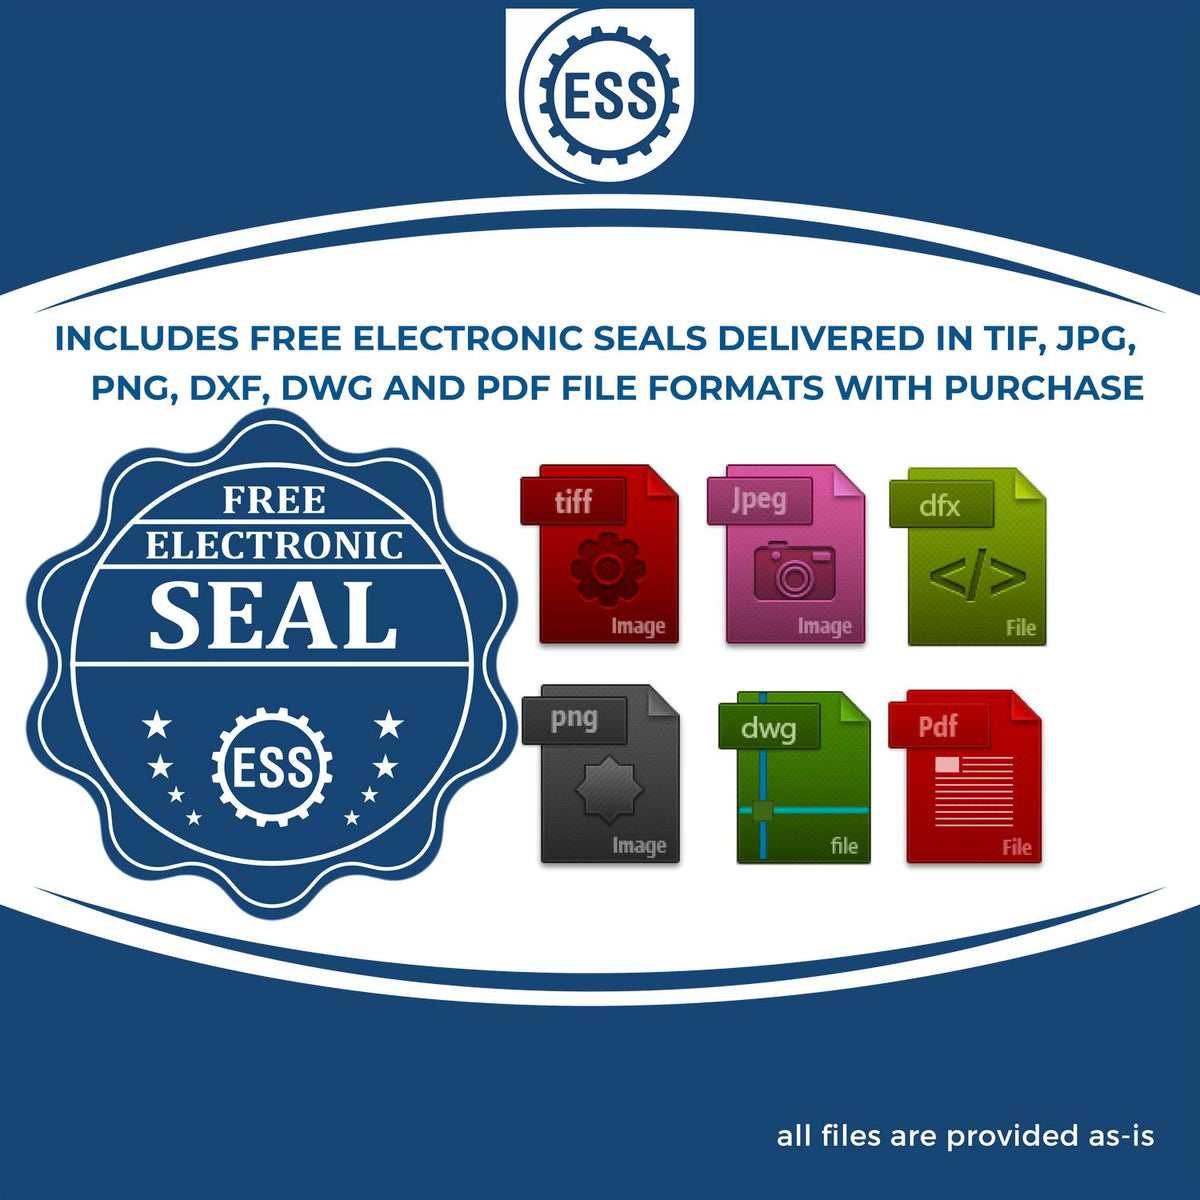 An infographic for the free electronic seal for the State of Idaho Extended Long Reach Geologist Seal illustrating the different file type icons such as DXF, DWG, TIF, JPG and PNG.